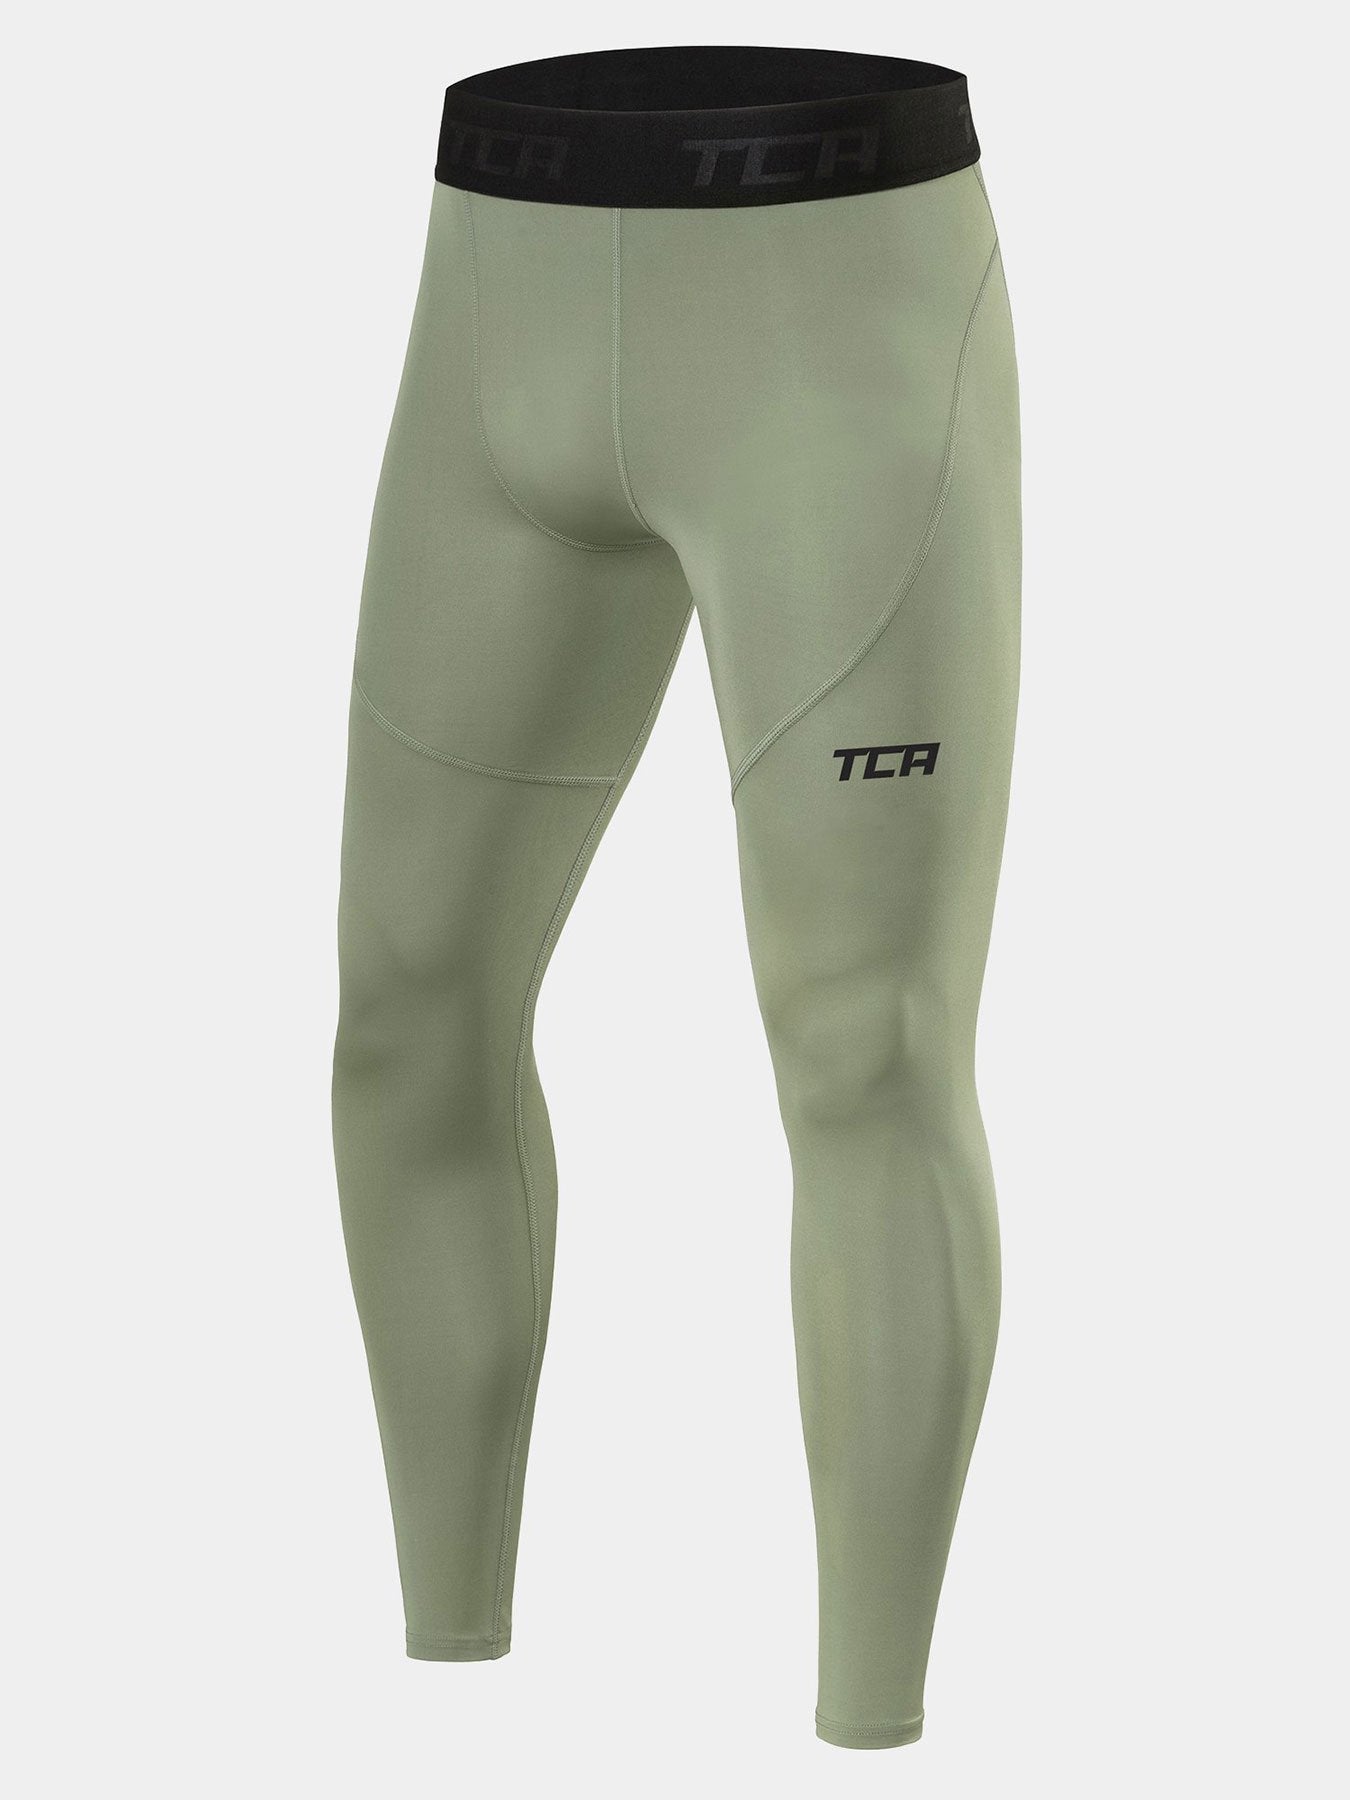 Pro Performance Compression Base Layer Tights For Men